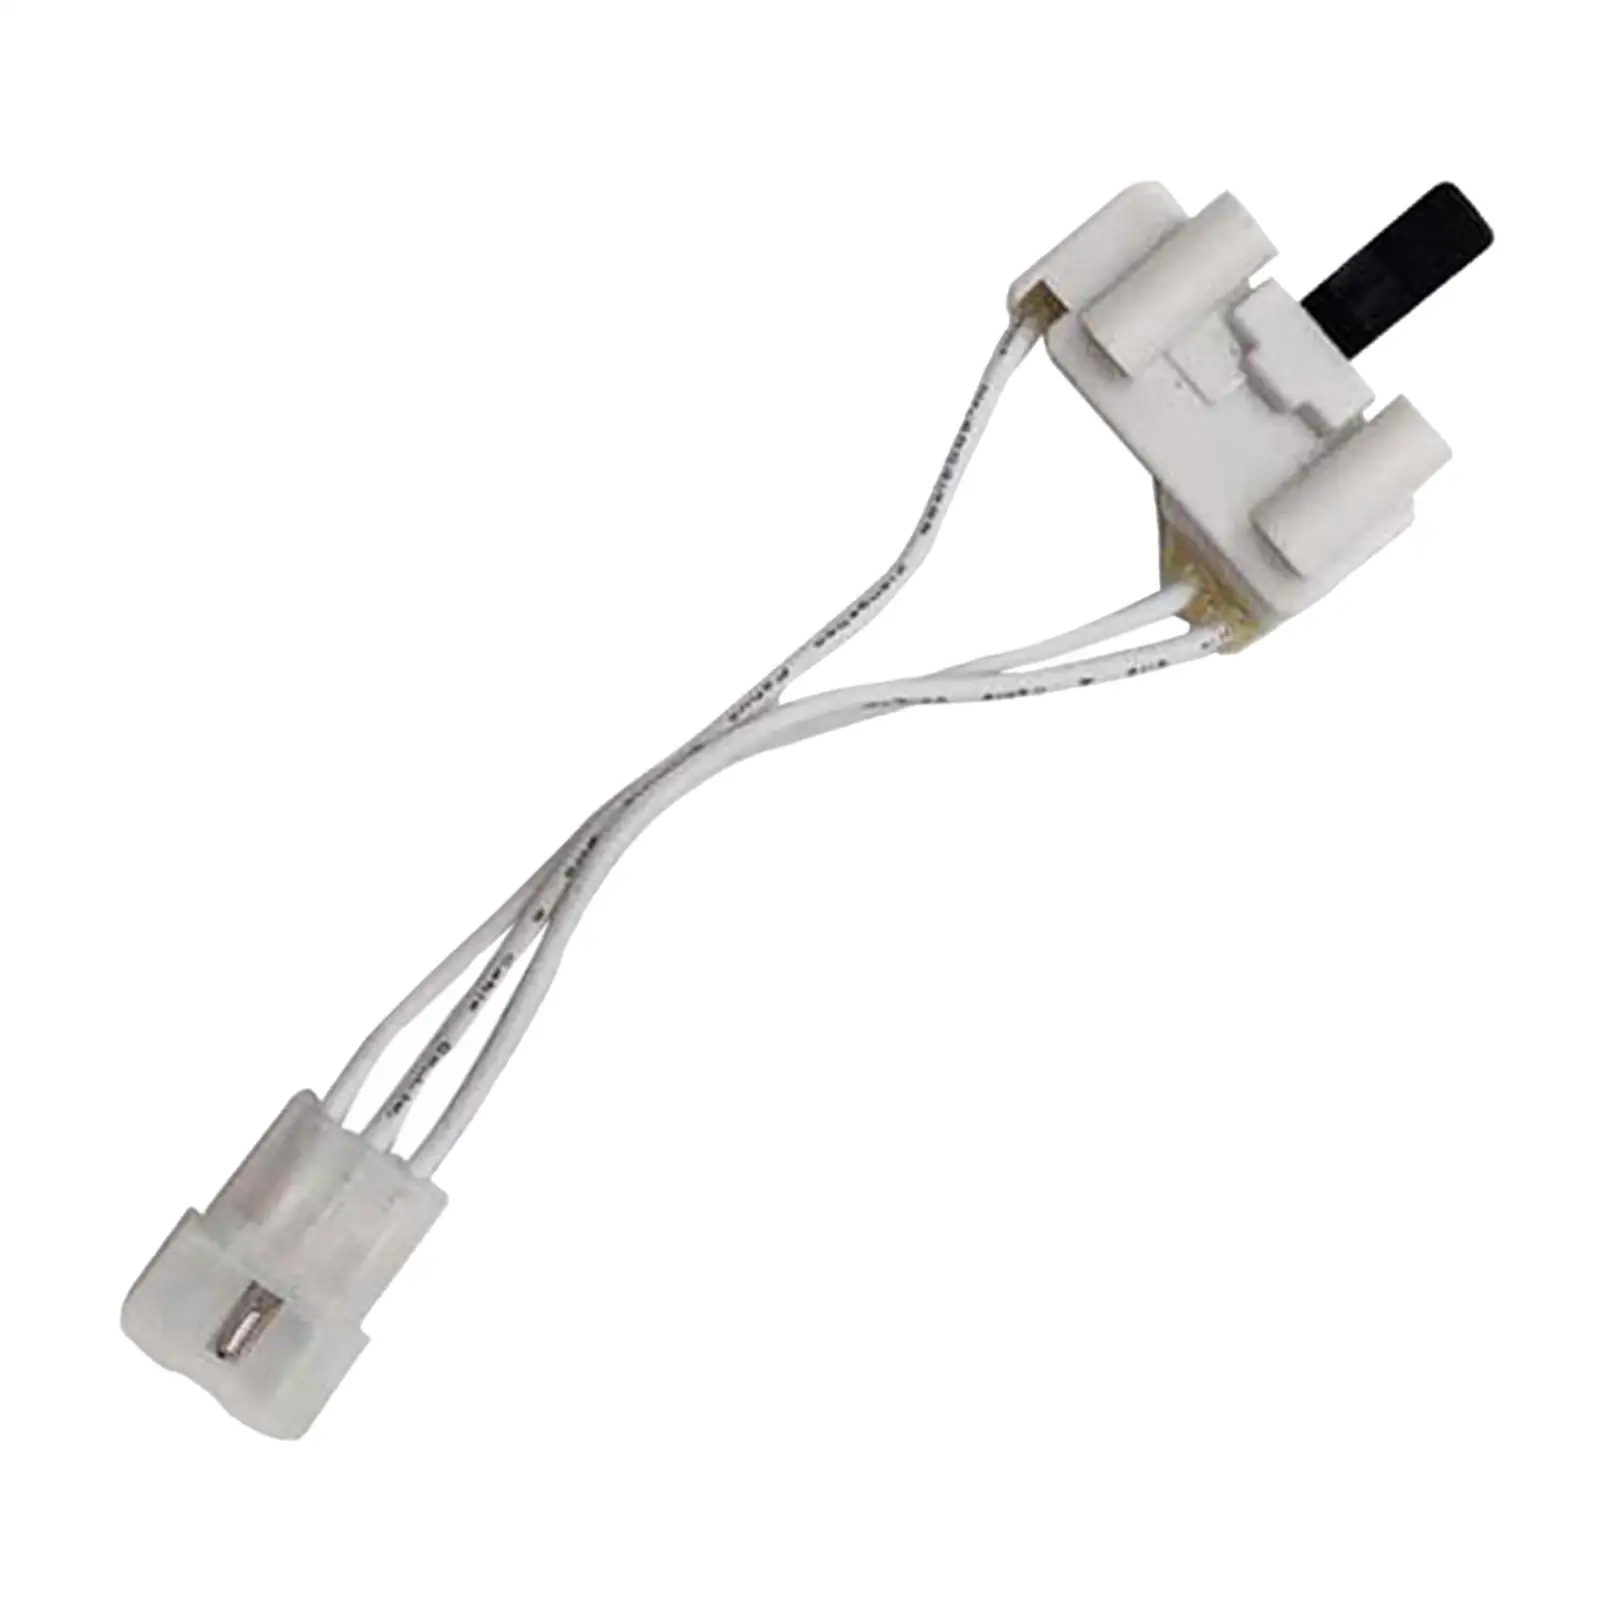 Washing Machine Switch Accessory Portable Durable Replaceable Reusable Accs Washer Switch Parts for 3406107 Washing Machine